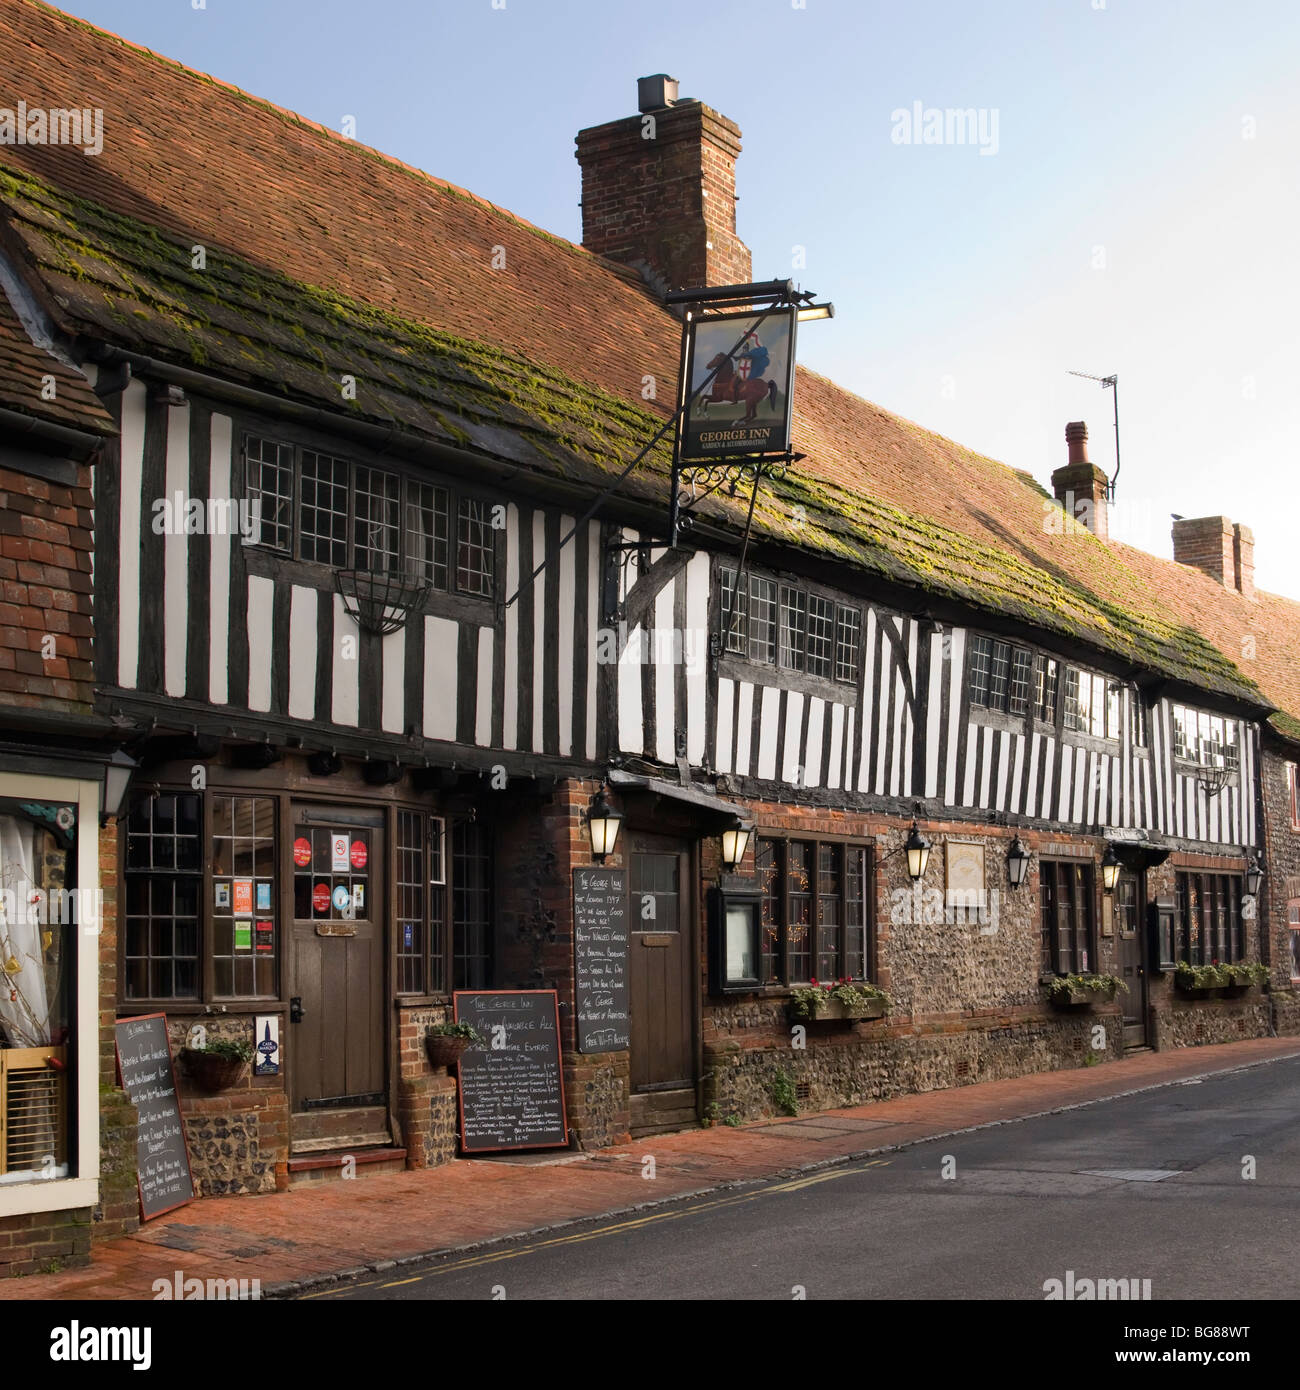 The St George pub in Alfriston, East Sussex, England. Stock Photo